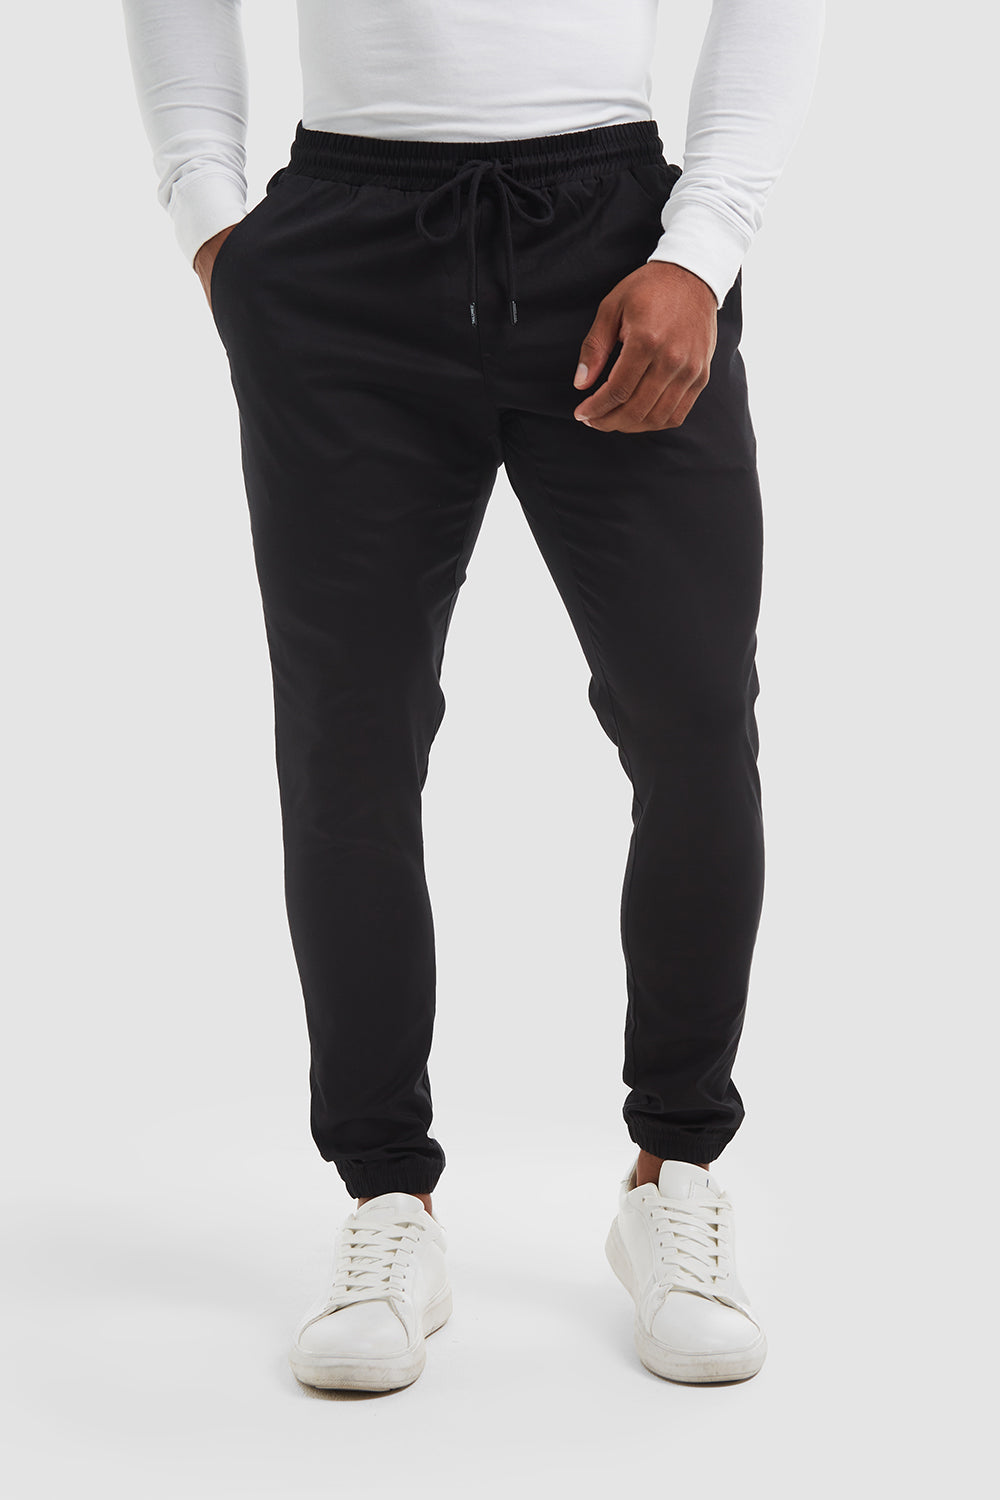 BANANA REPUBLIC Sloan Skinny Fit Tailored Trousers – Re-Fashion